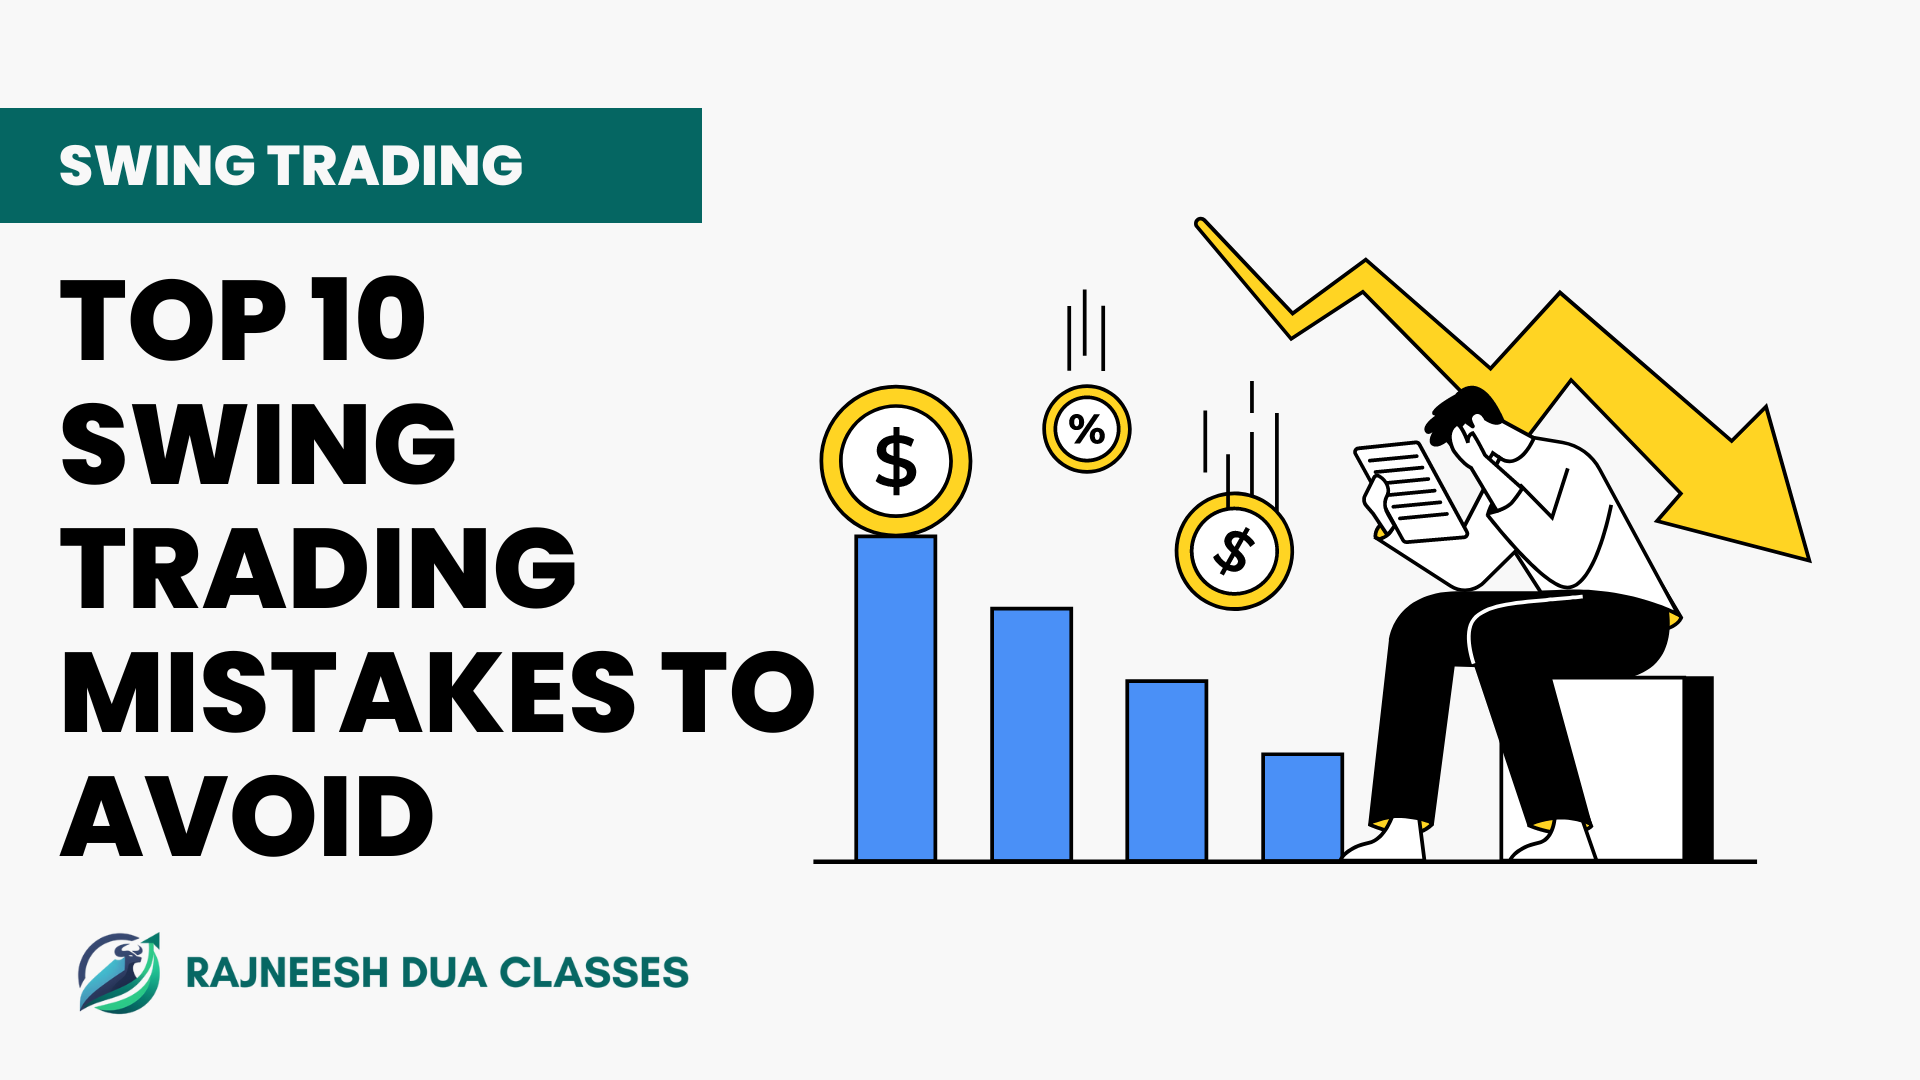 Top 10 Swing Trading Mistakes to Avoid